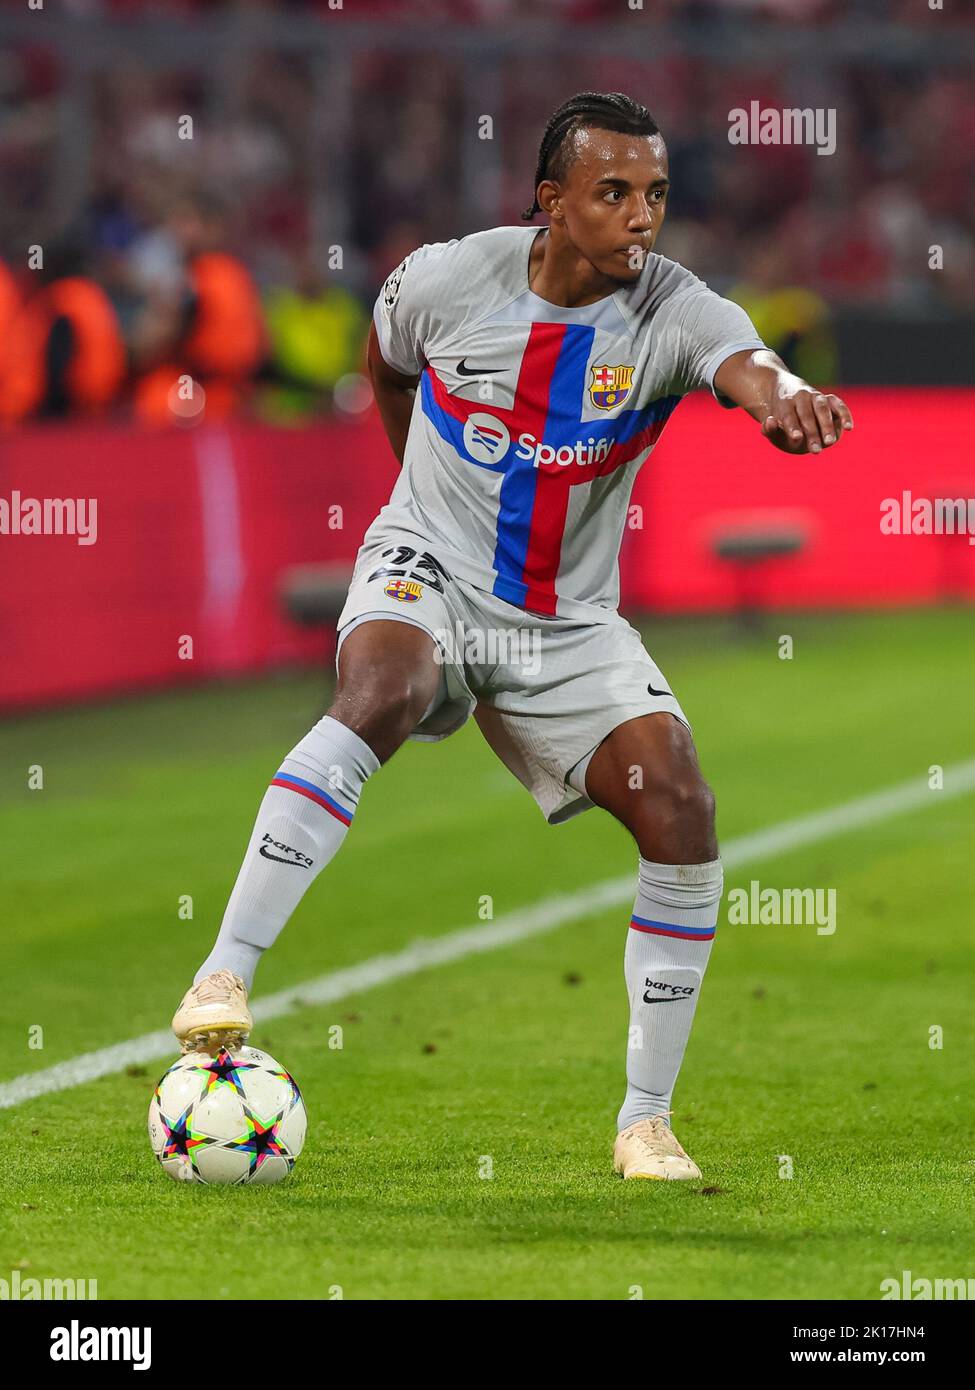 MUNCHEN, GERMANY - SEPTEMBER 13: Jules Kounde of FC Barcelona runs with the ball during the Group C - UEFA Champions League match between FC Bayern Munchen and FC Barcelona at the Allianz Arena on September 13, 2022 in Munchen, Germany (Photo by DAX Images/Orange Pictures) Stock Photo